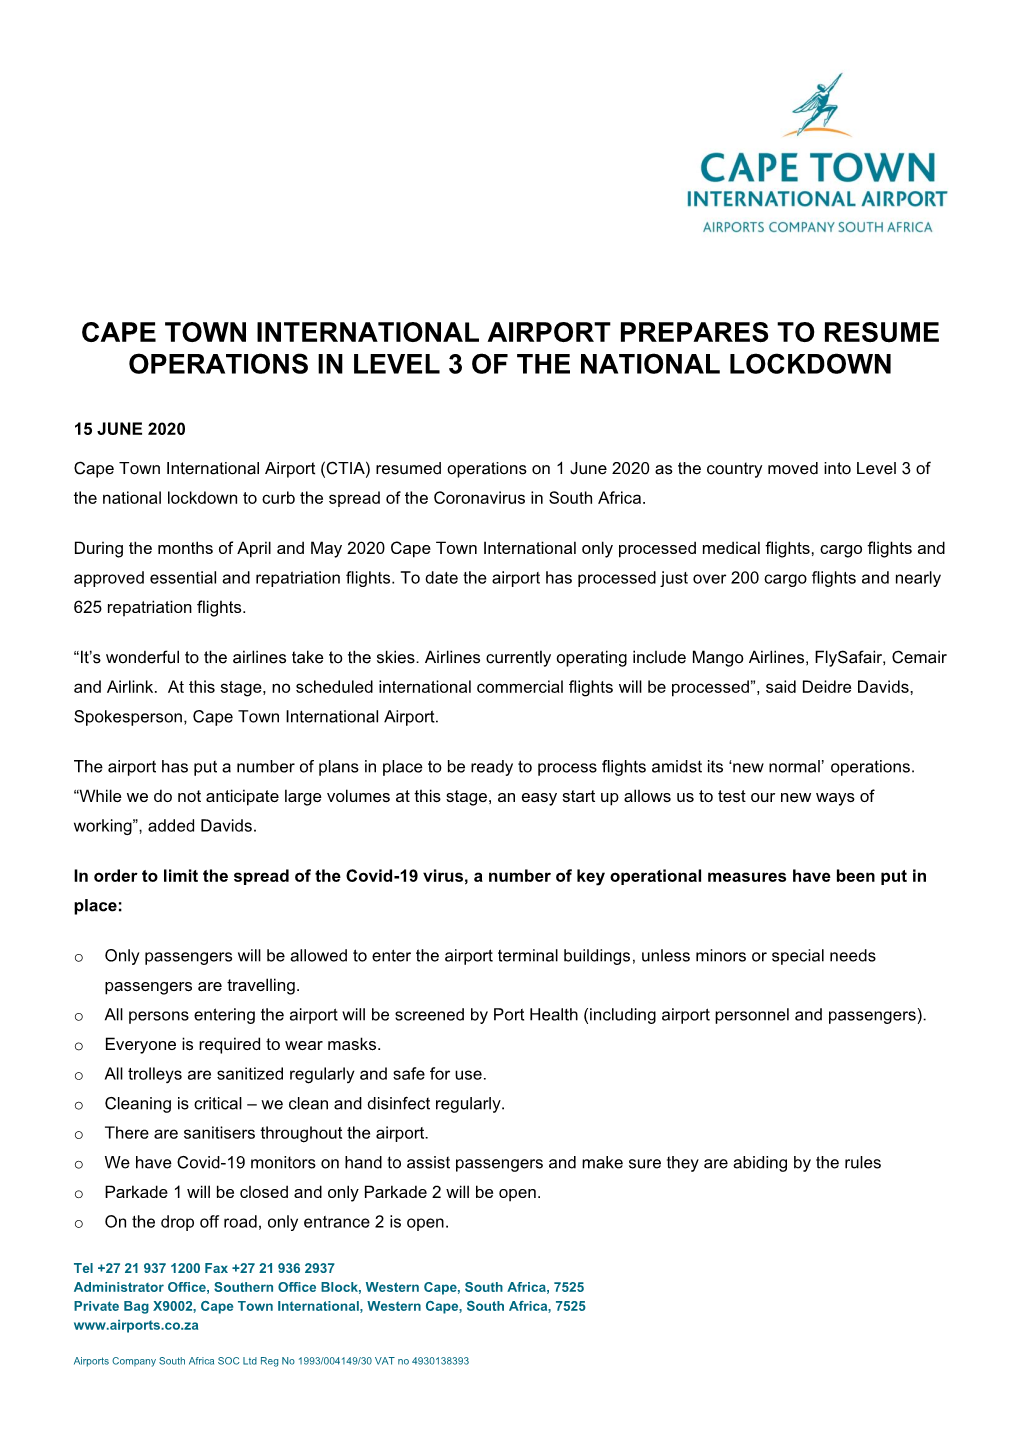 Cape Town International Airport Prepares to Resume Operations in Level 3 of the National Lockdown